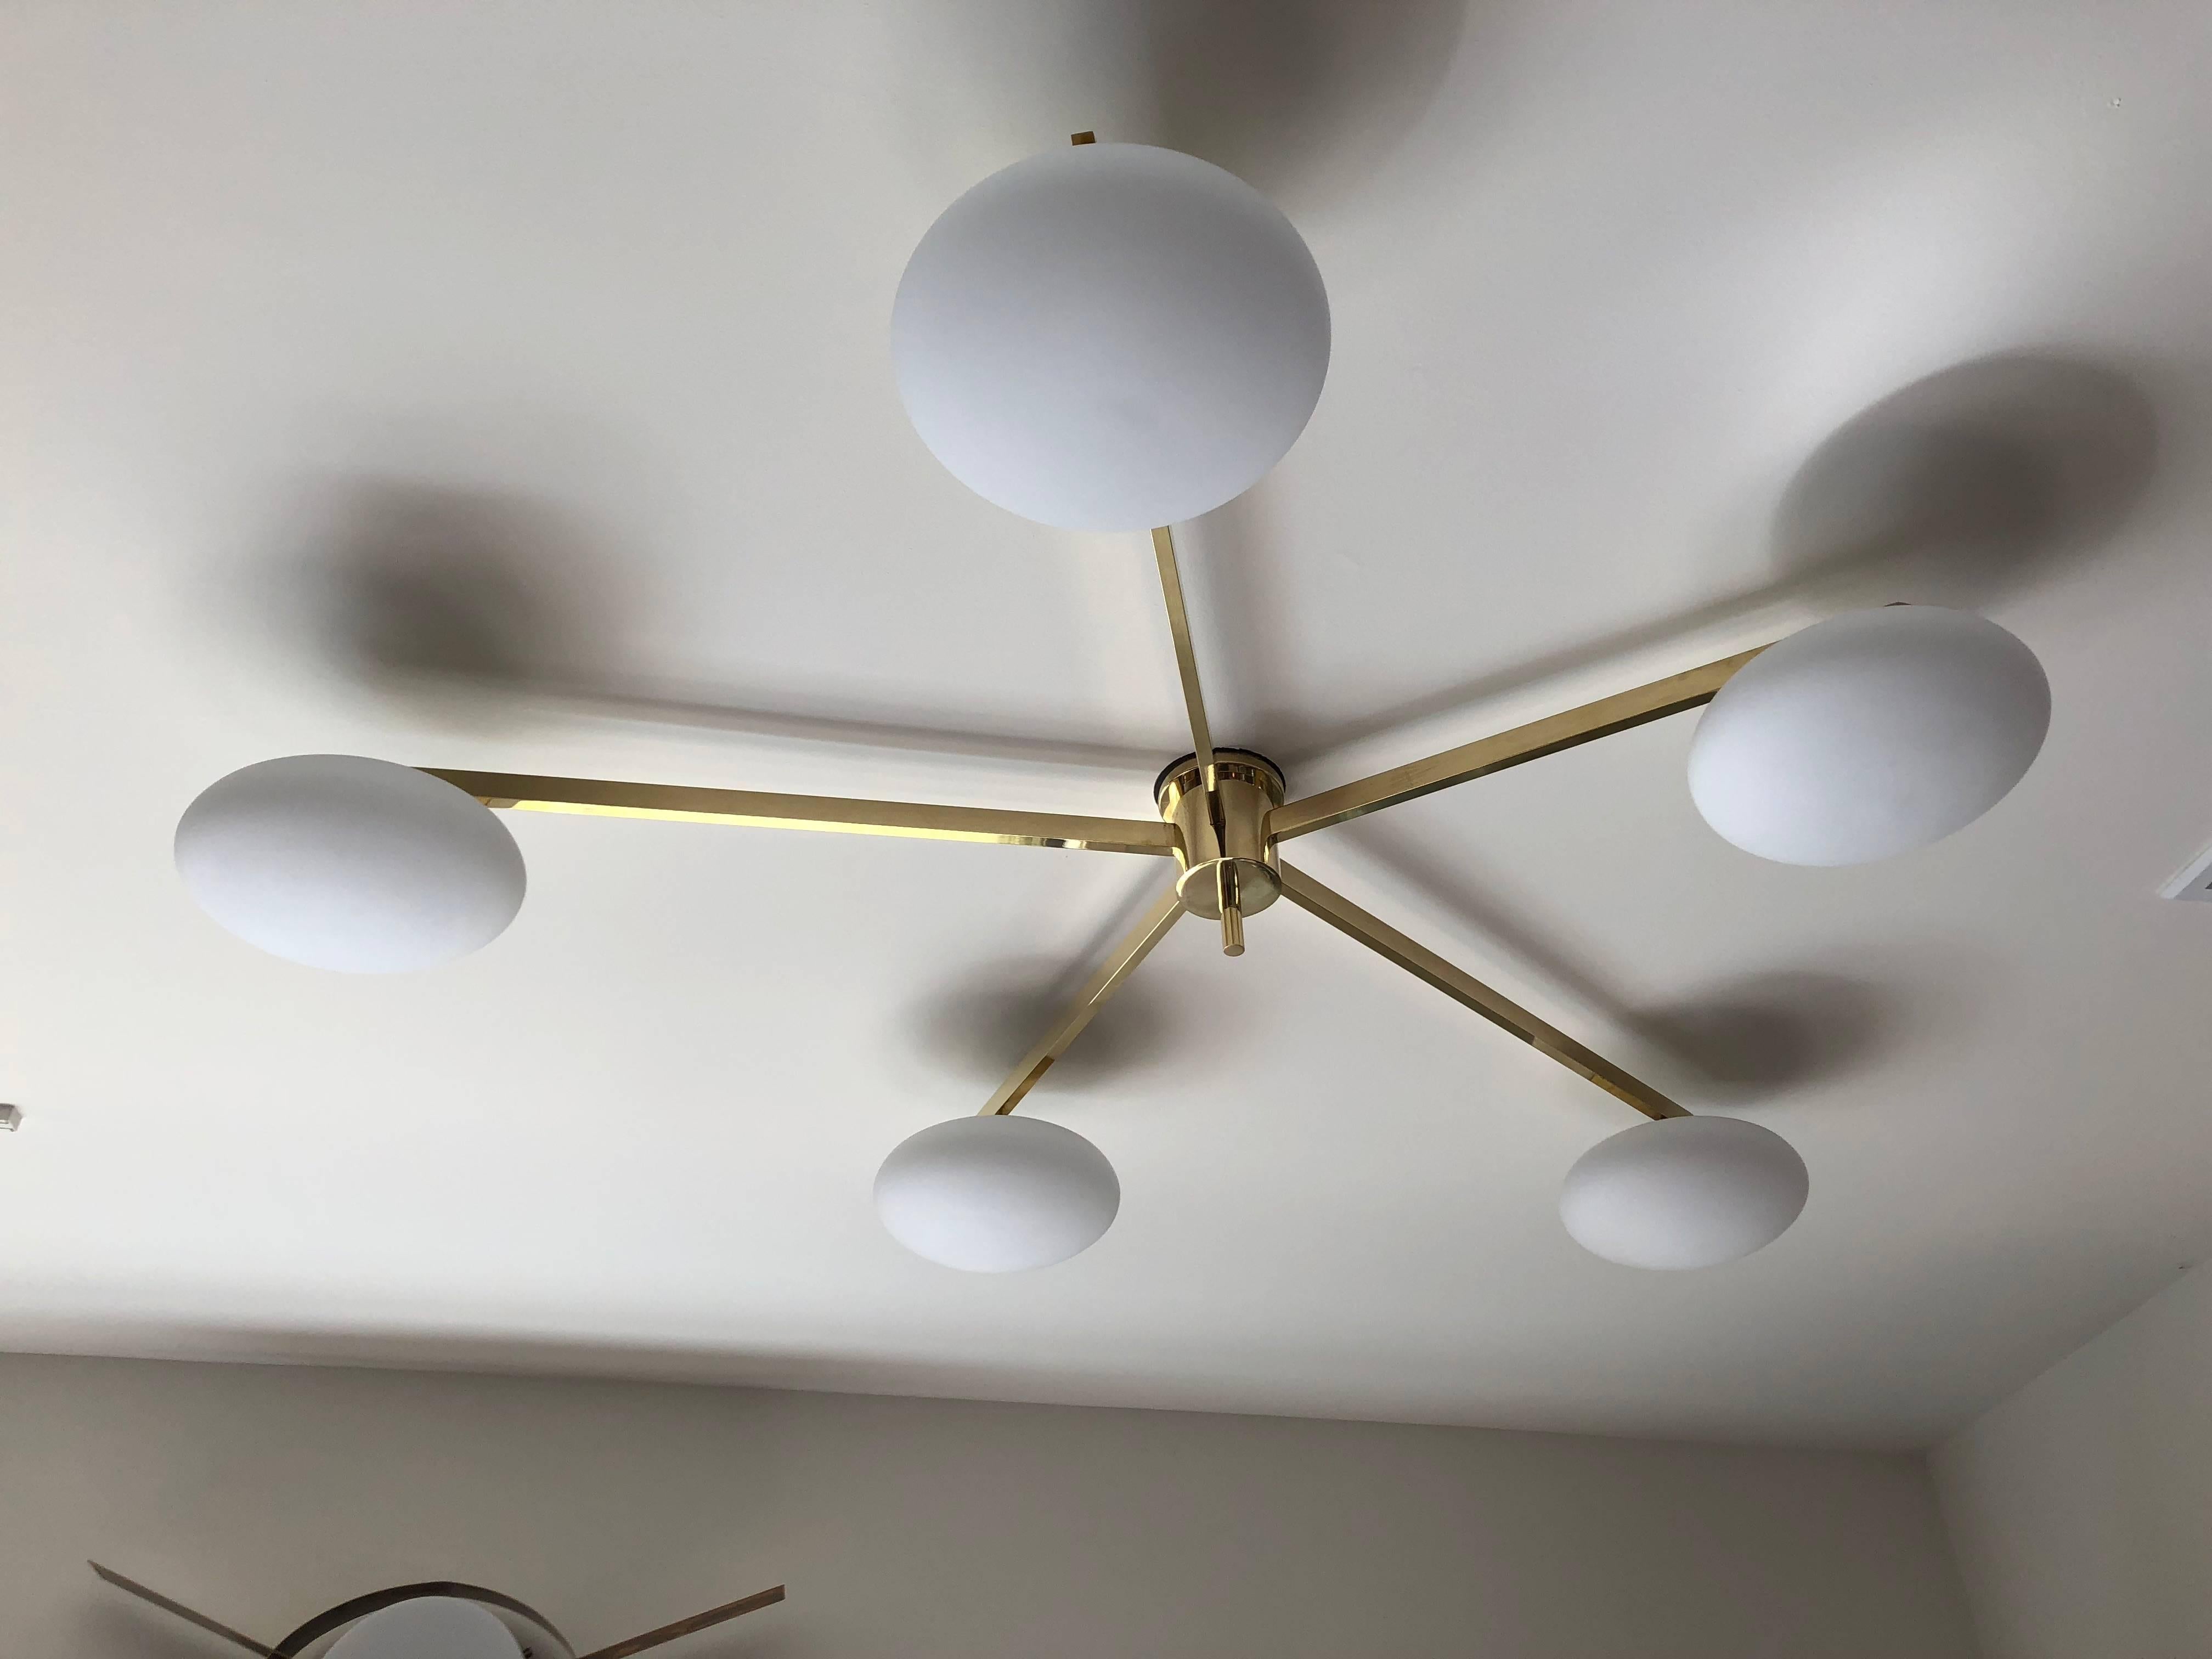 Five brass arms of different lengths emanate from a centre brass column to create this modern asymmetric classic ceiling fixture. Beautiful handblown white glass globes suspend at the end of each arm. All parts are in keeping with production